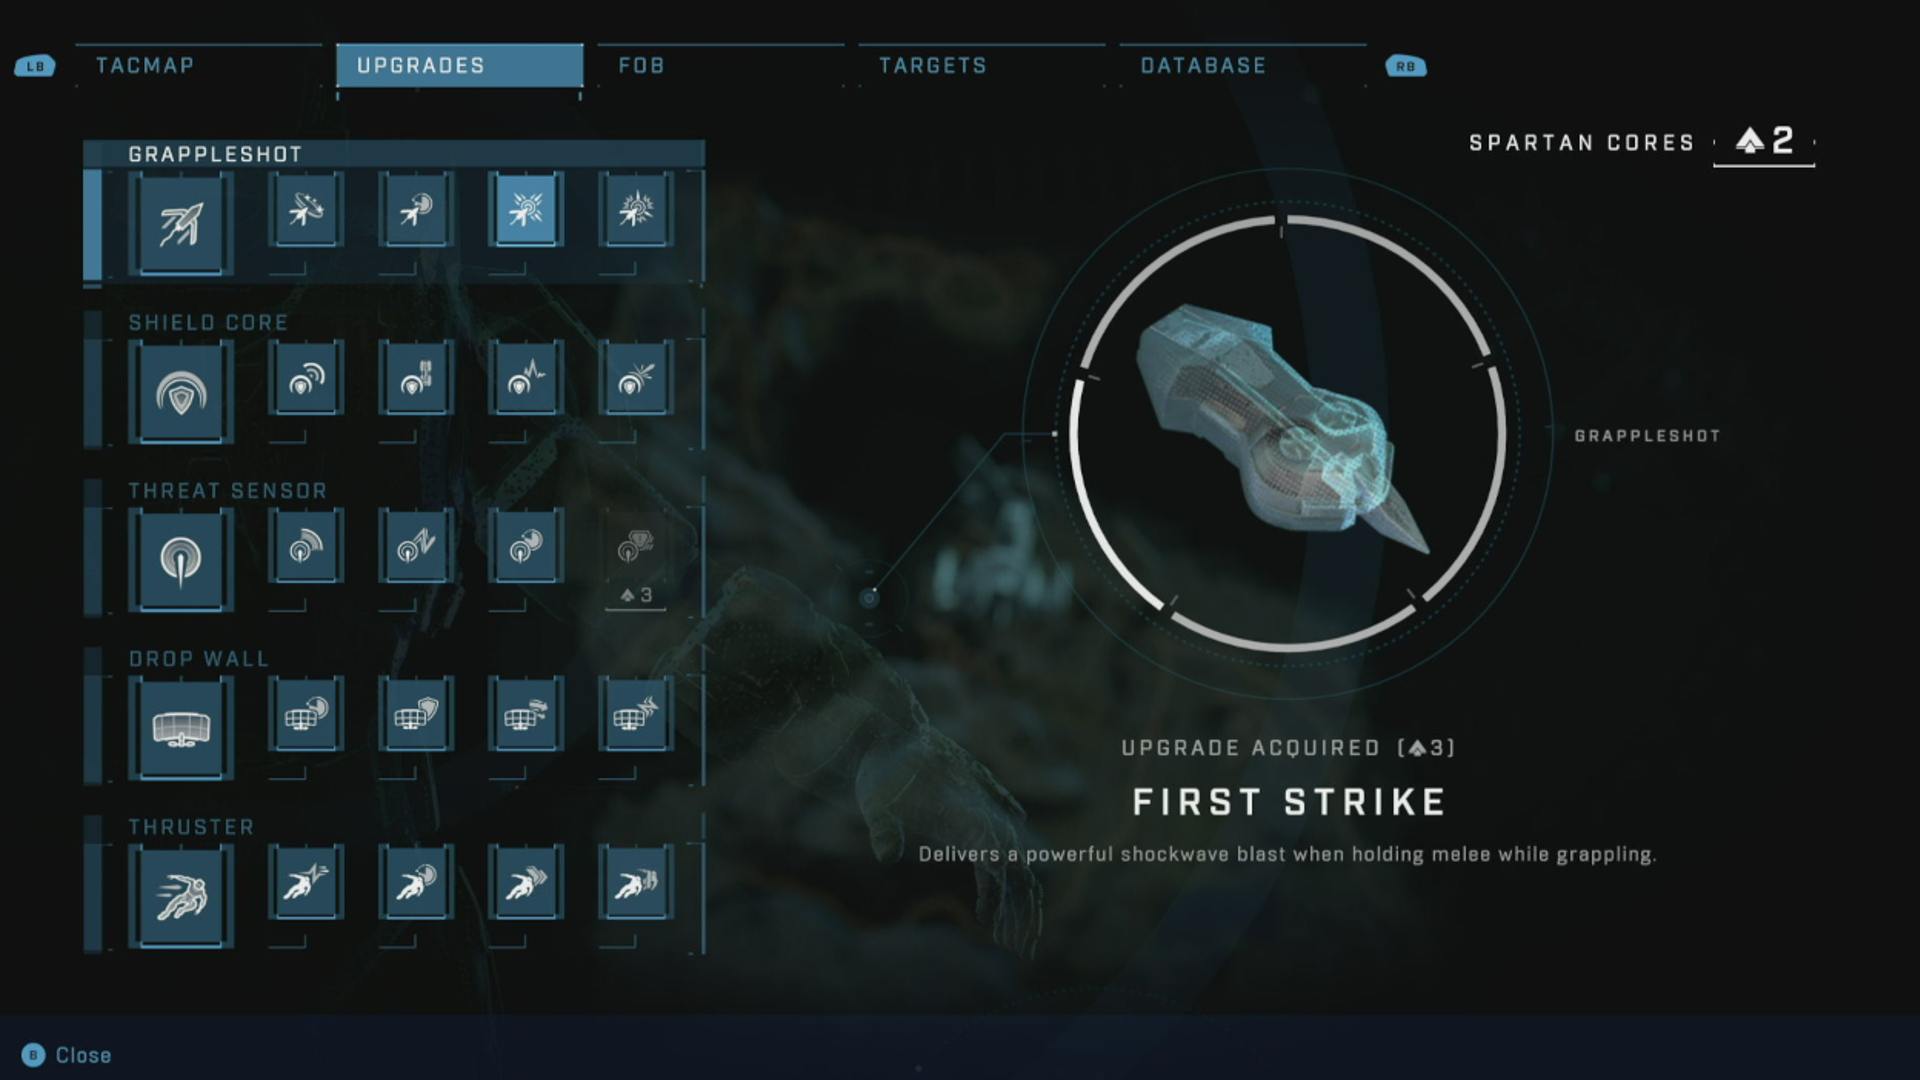 Halo Infinite Best Upgrades: The menu showing the First Strike upgrade.